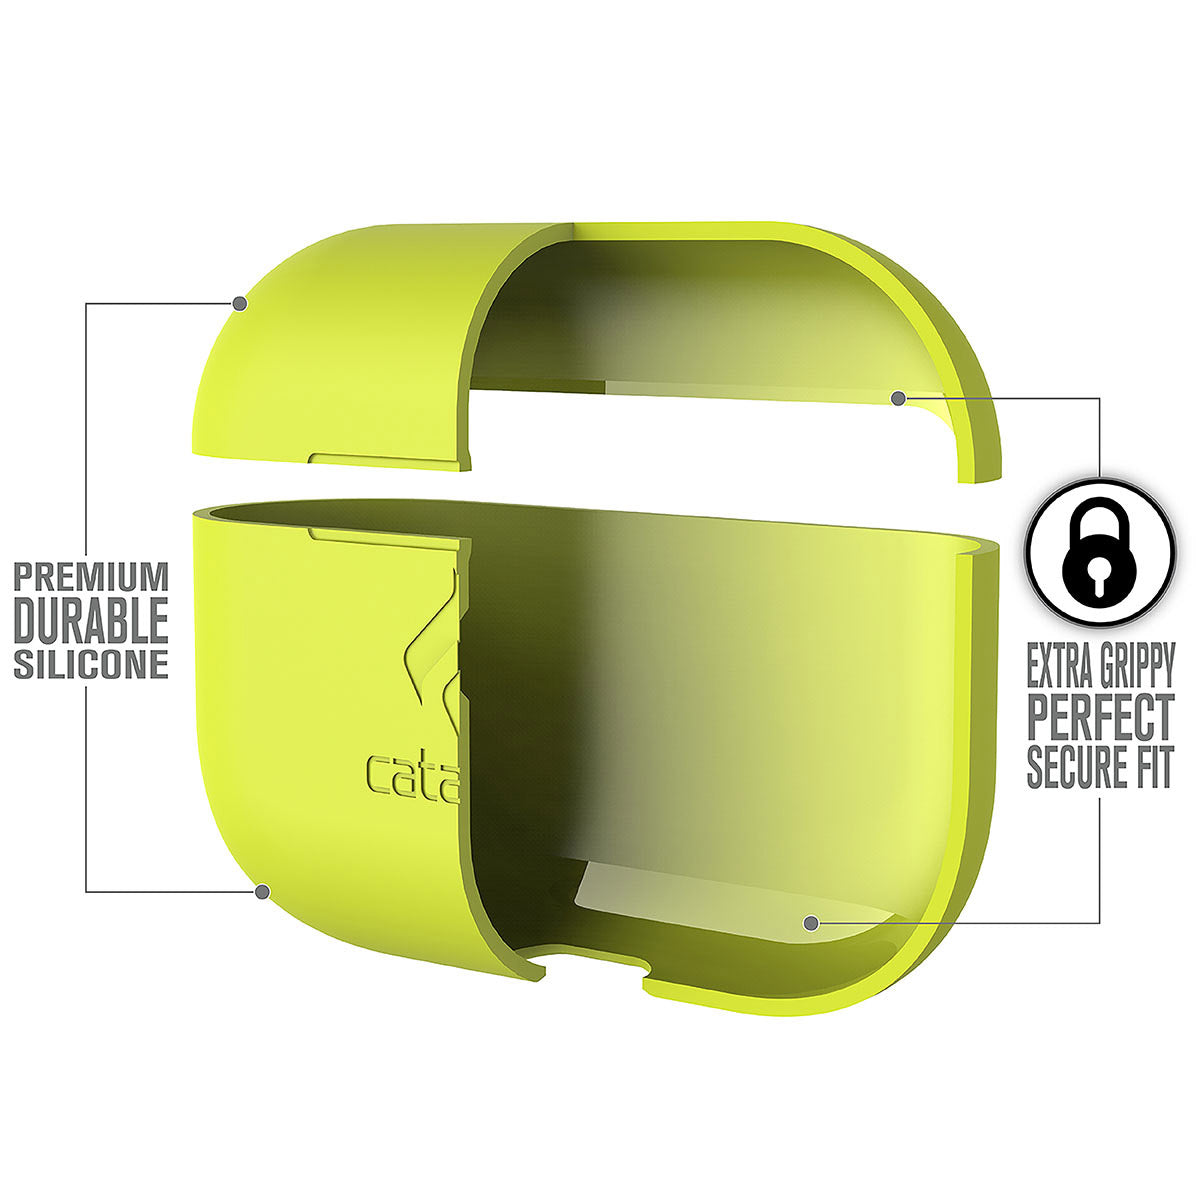 Catalyst airpods pro gen 2/1 slim case showing the case features in a neon yellow colorway text reads premium durable silicone extra grippy perfect secure fit